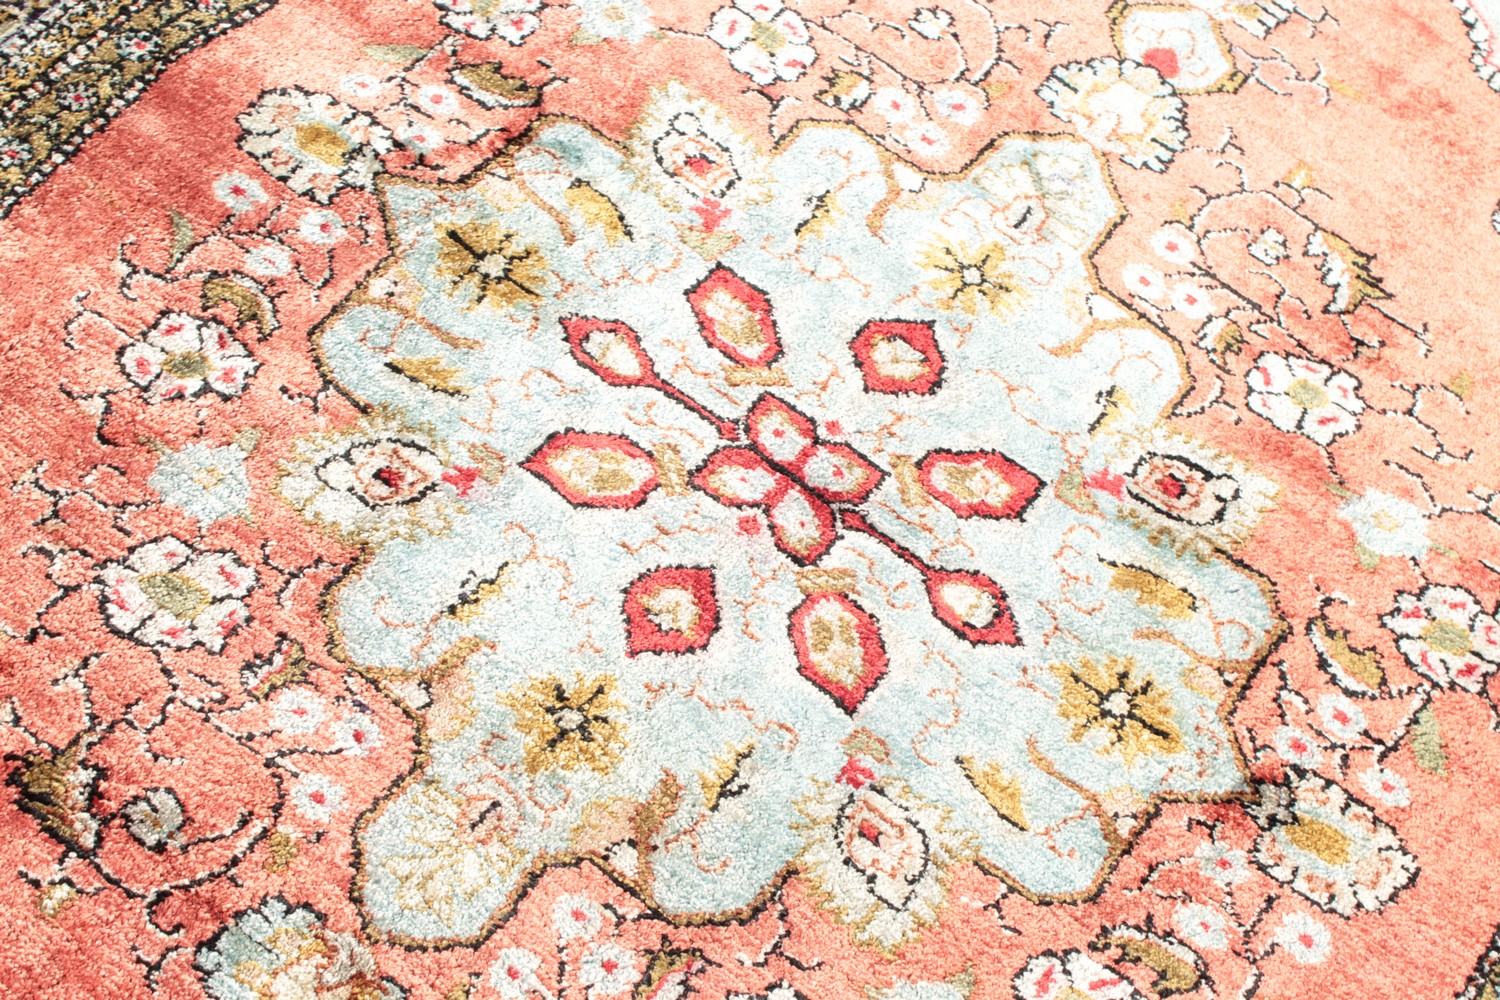 A FINE PERSIAN SILK RUG with central motif on a red background and floral border. 4ft 2ins x 2ft - Image 5 of 9